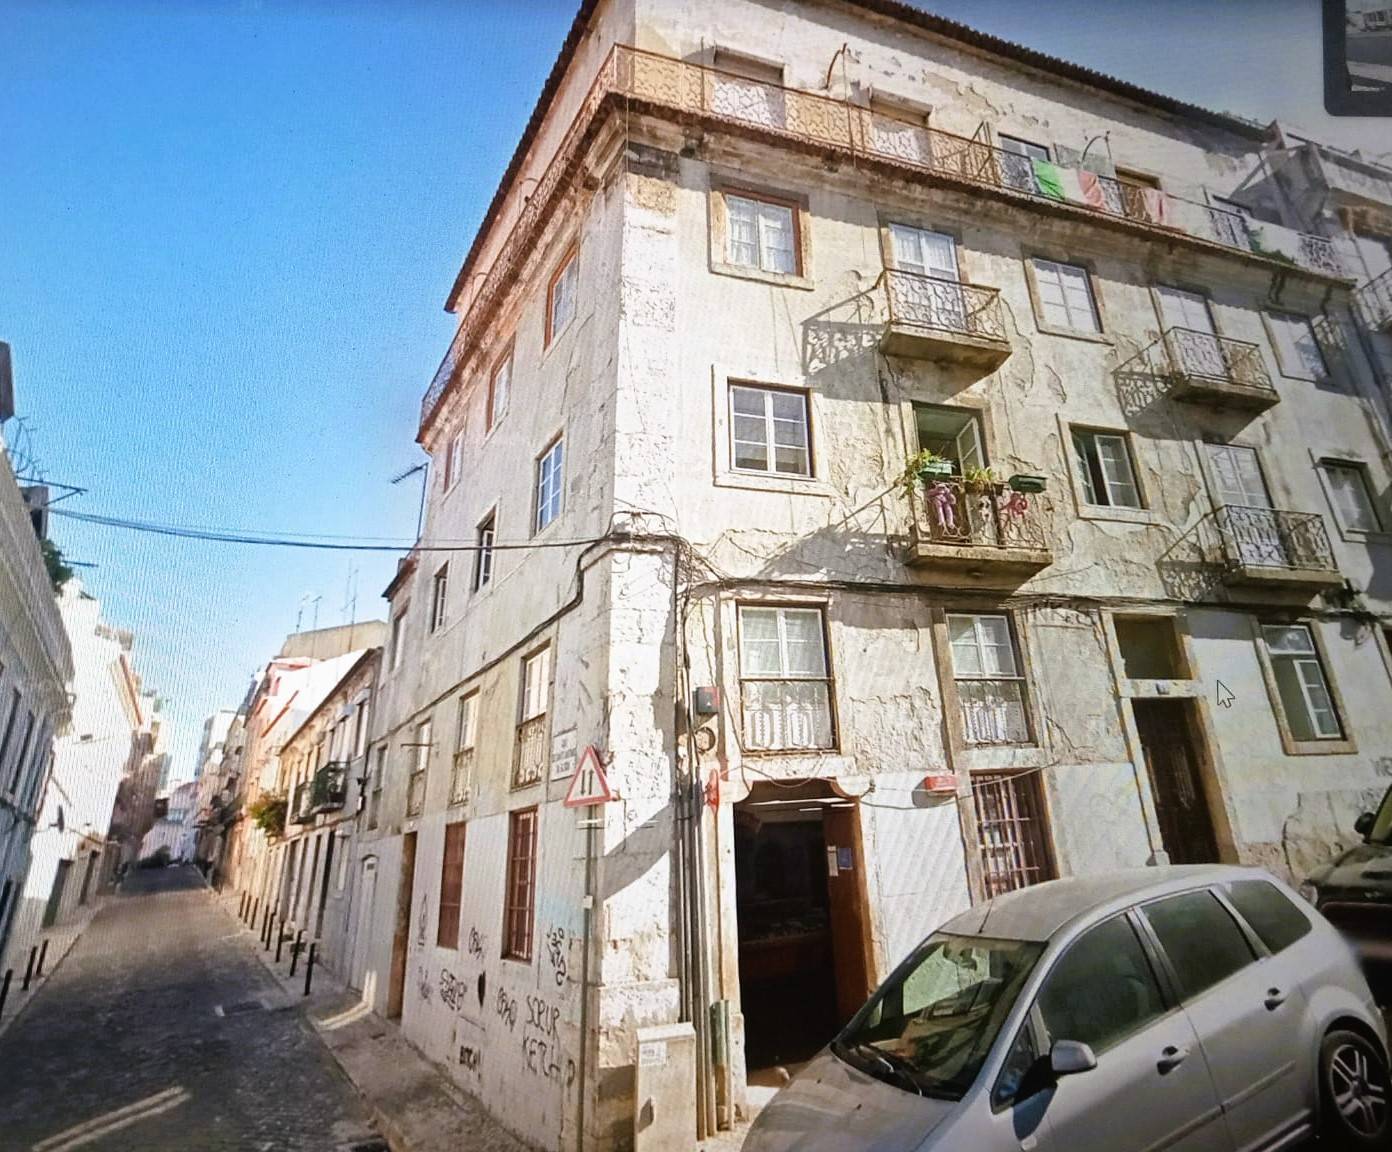 INVESTMENT OPPORTUNITY: BUILDING IN THE HEART OF LISBON FOR RESIDENCES OR LUXURY HOTEL PROJECT